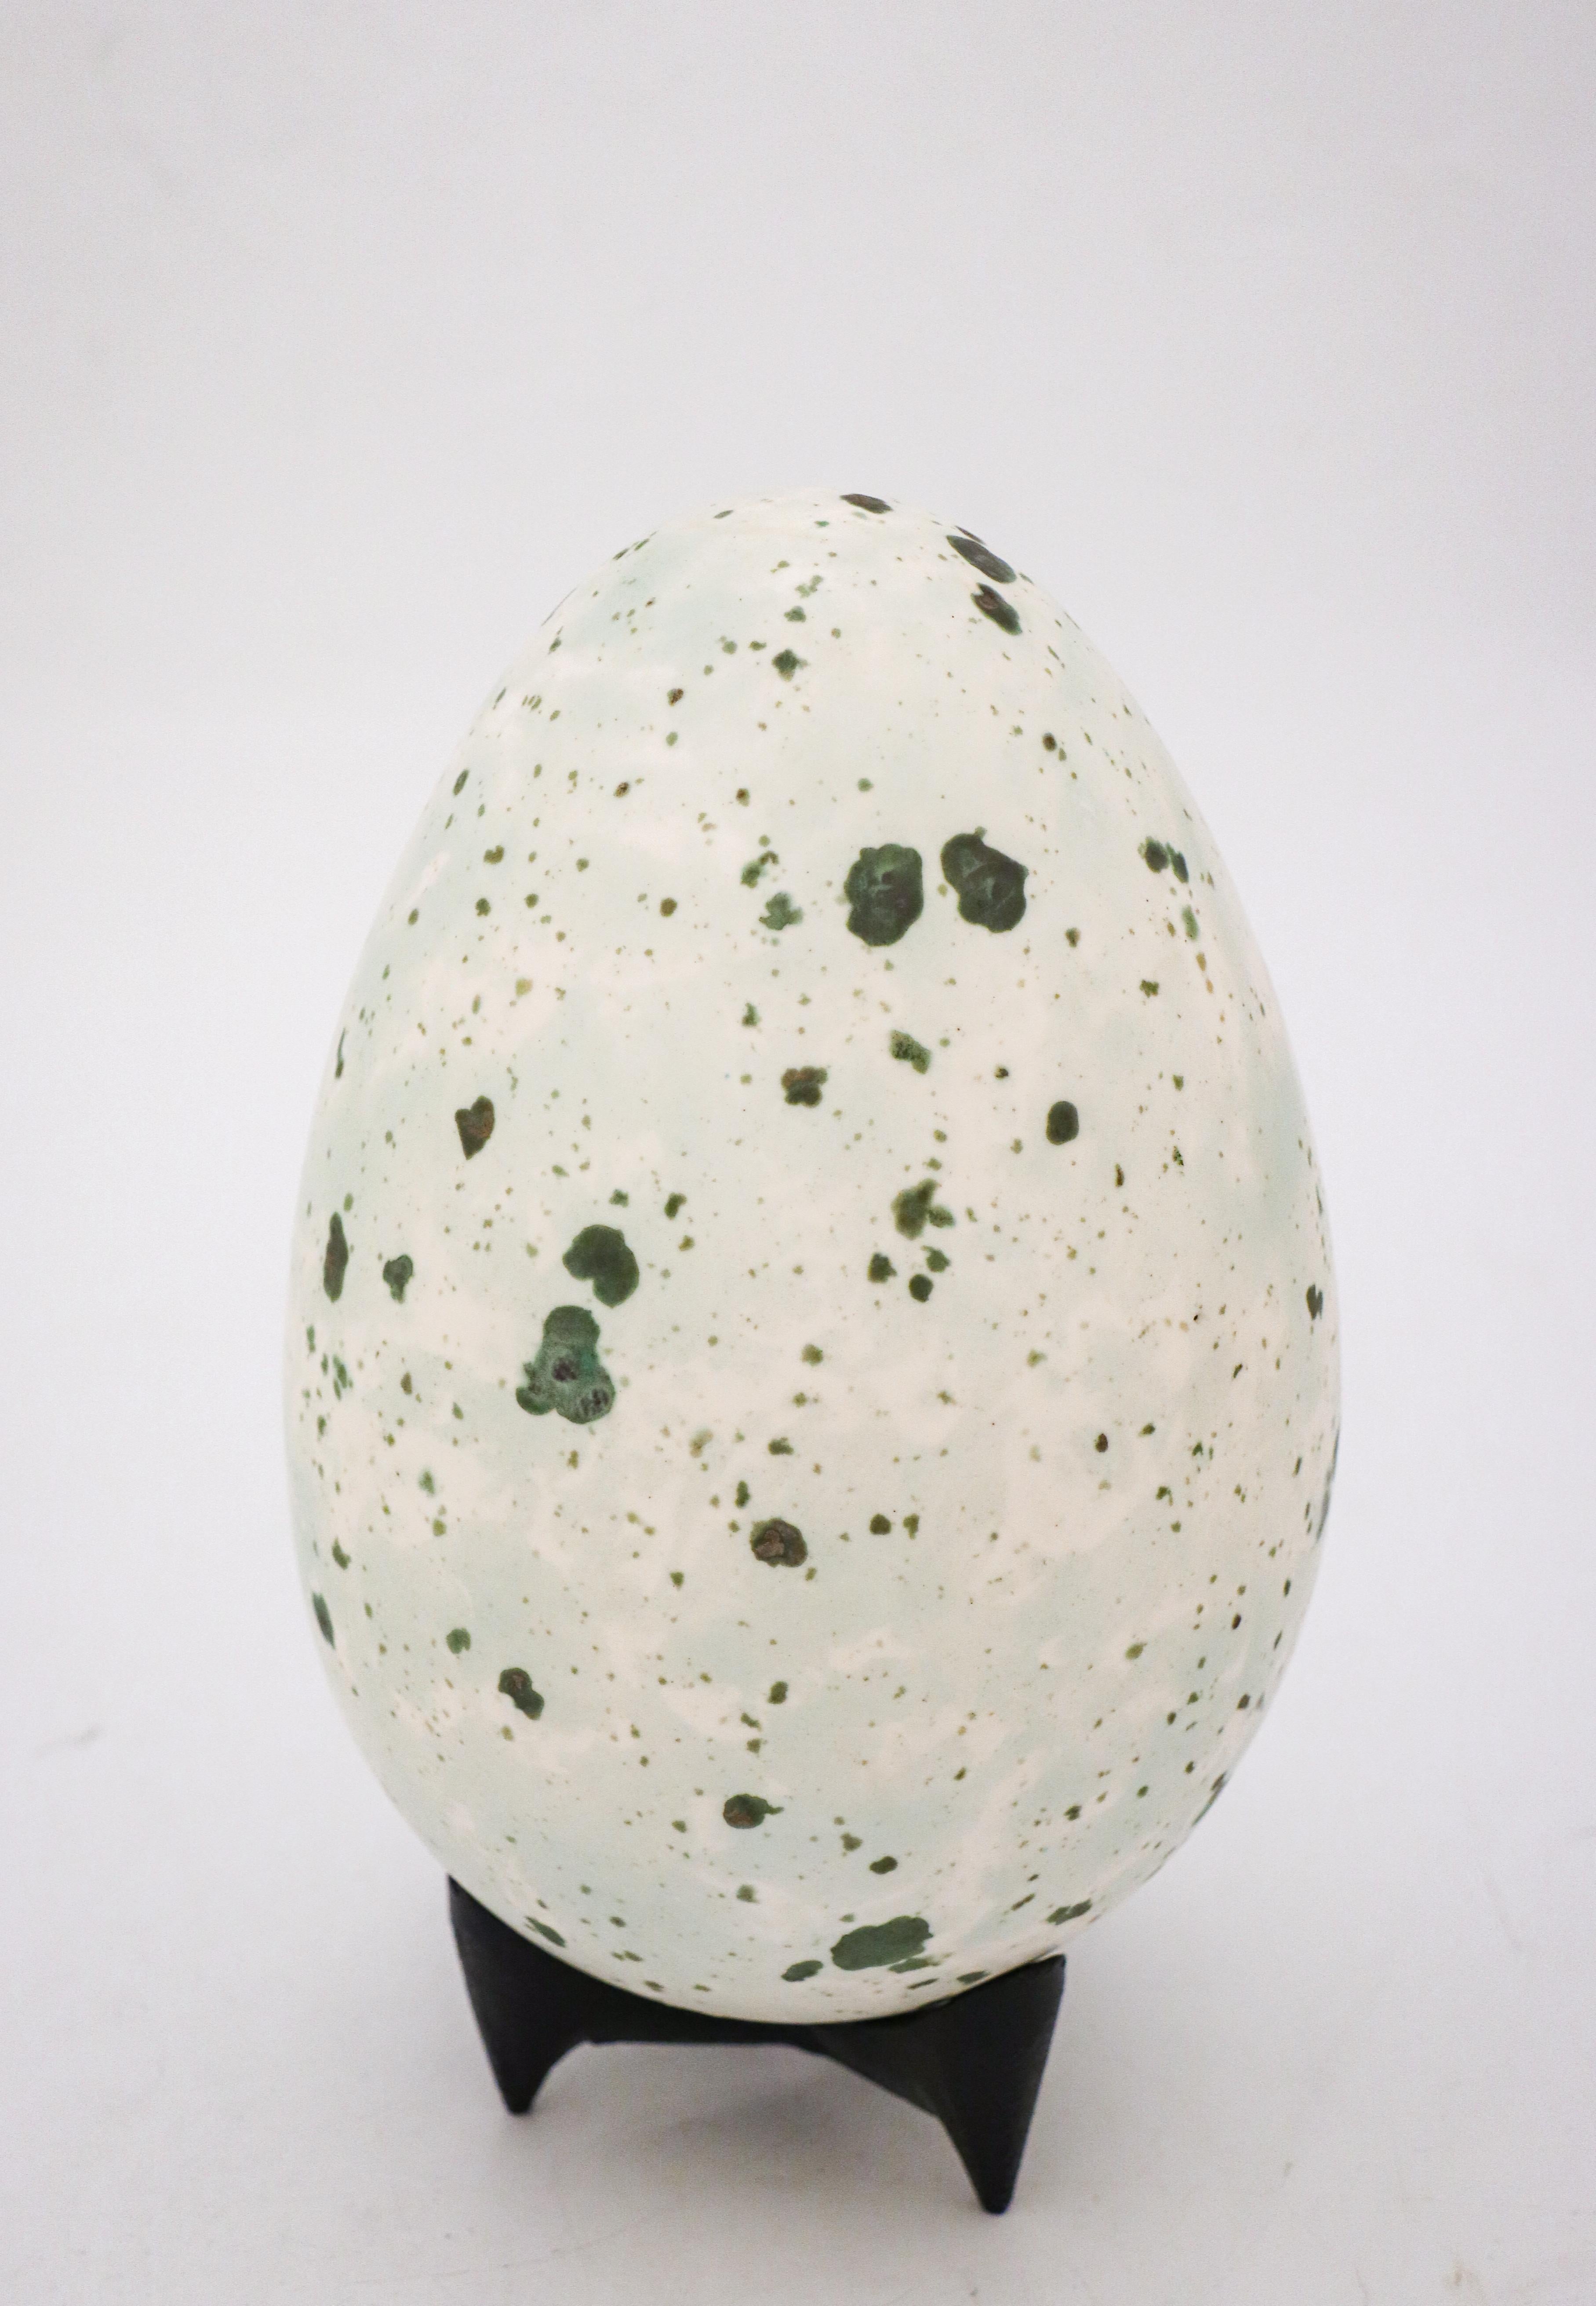 Scandinavian Modern Stoneware Egg Sculpture White & Turquoise by Hans Hedberg, Biot, France For Sale